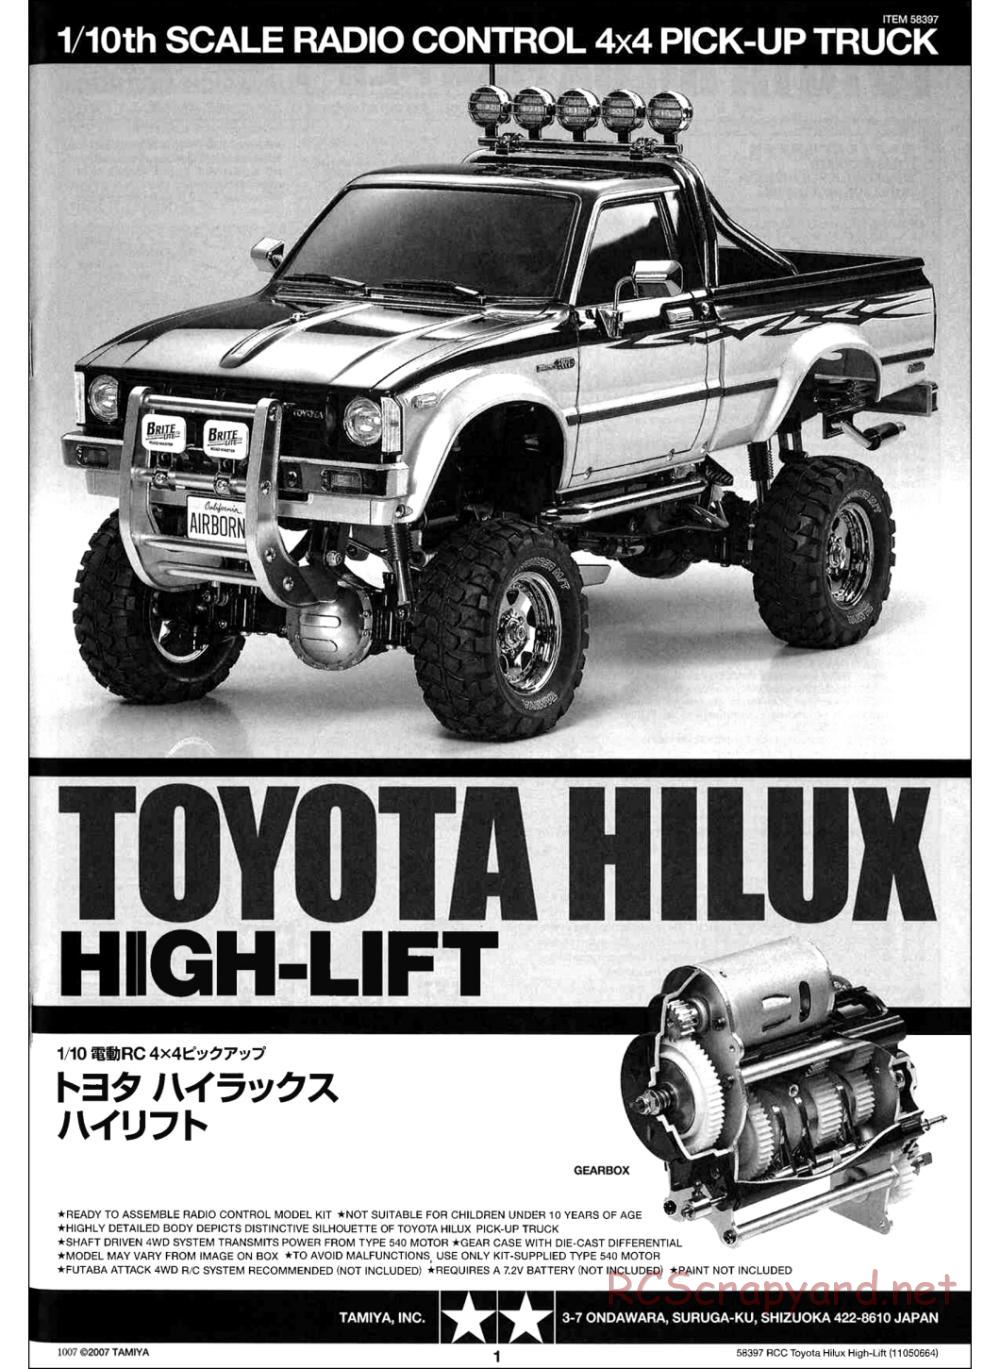 Tamiya - Toyota Hilux High-Lift Chassis - Manual - Page 1